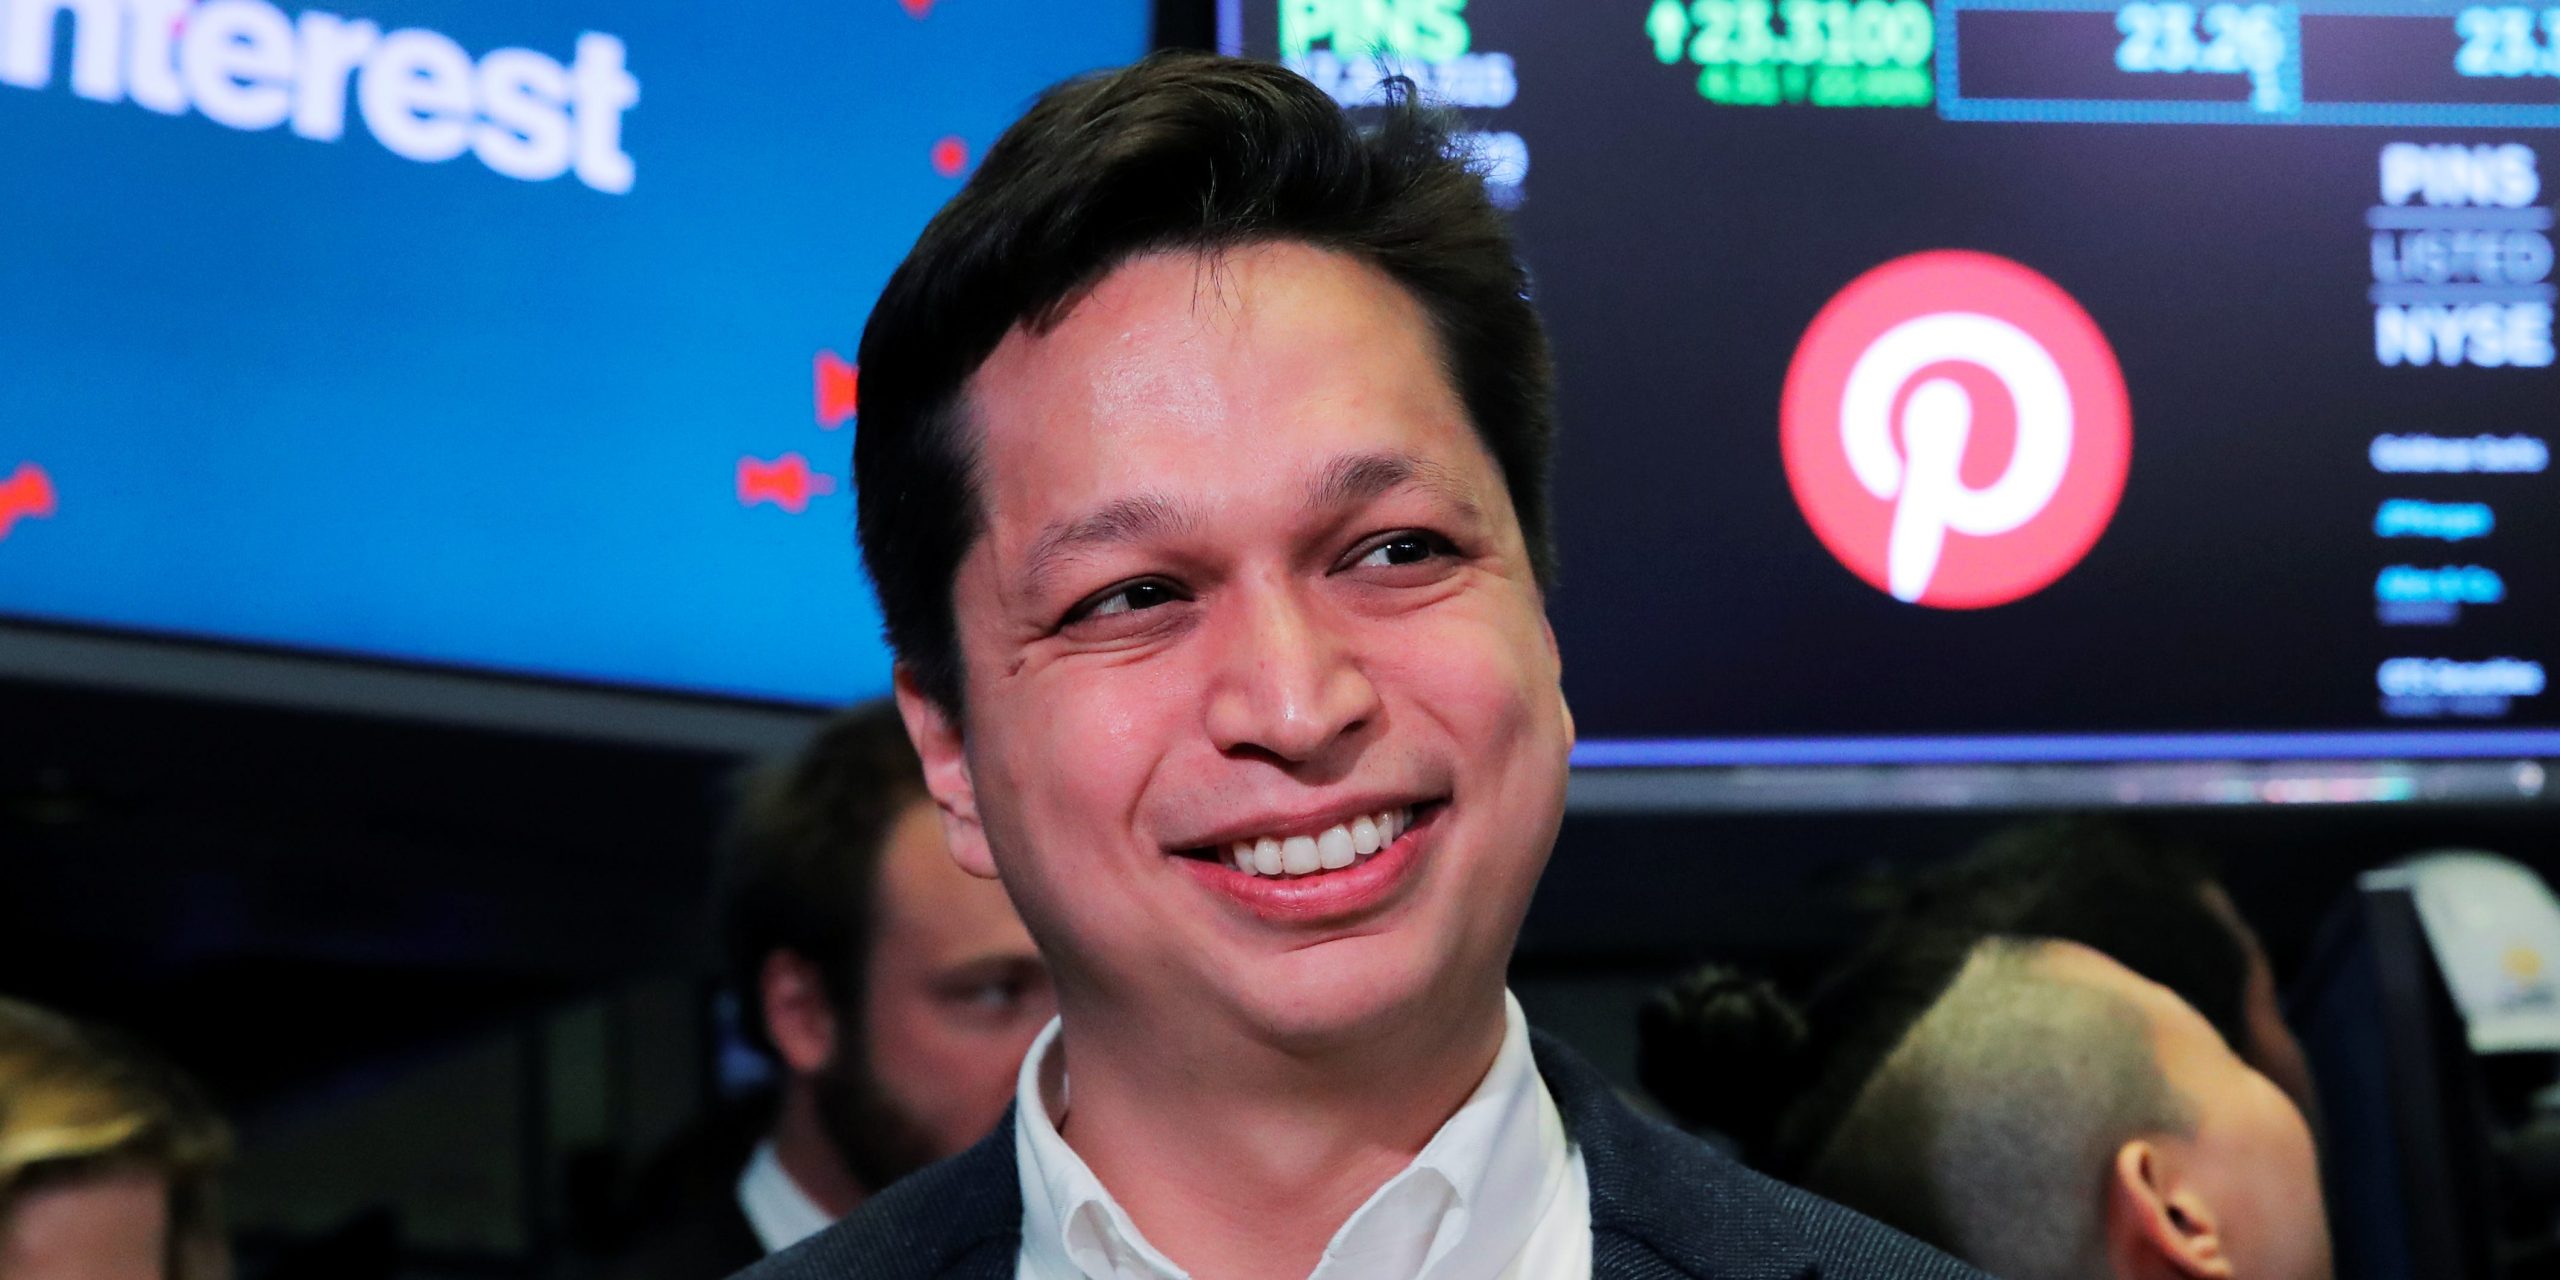 A headshot of Pinterest CEO Ben Silbermann on the stock exchange floor in front of a sign with the pinterest logo